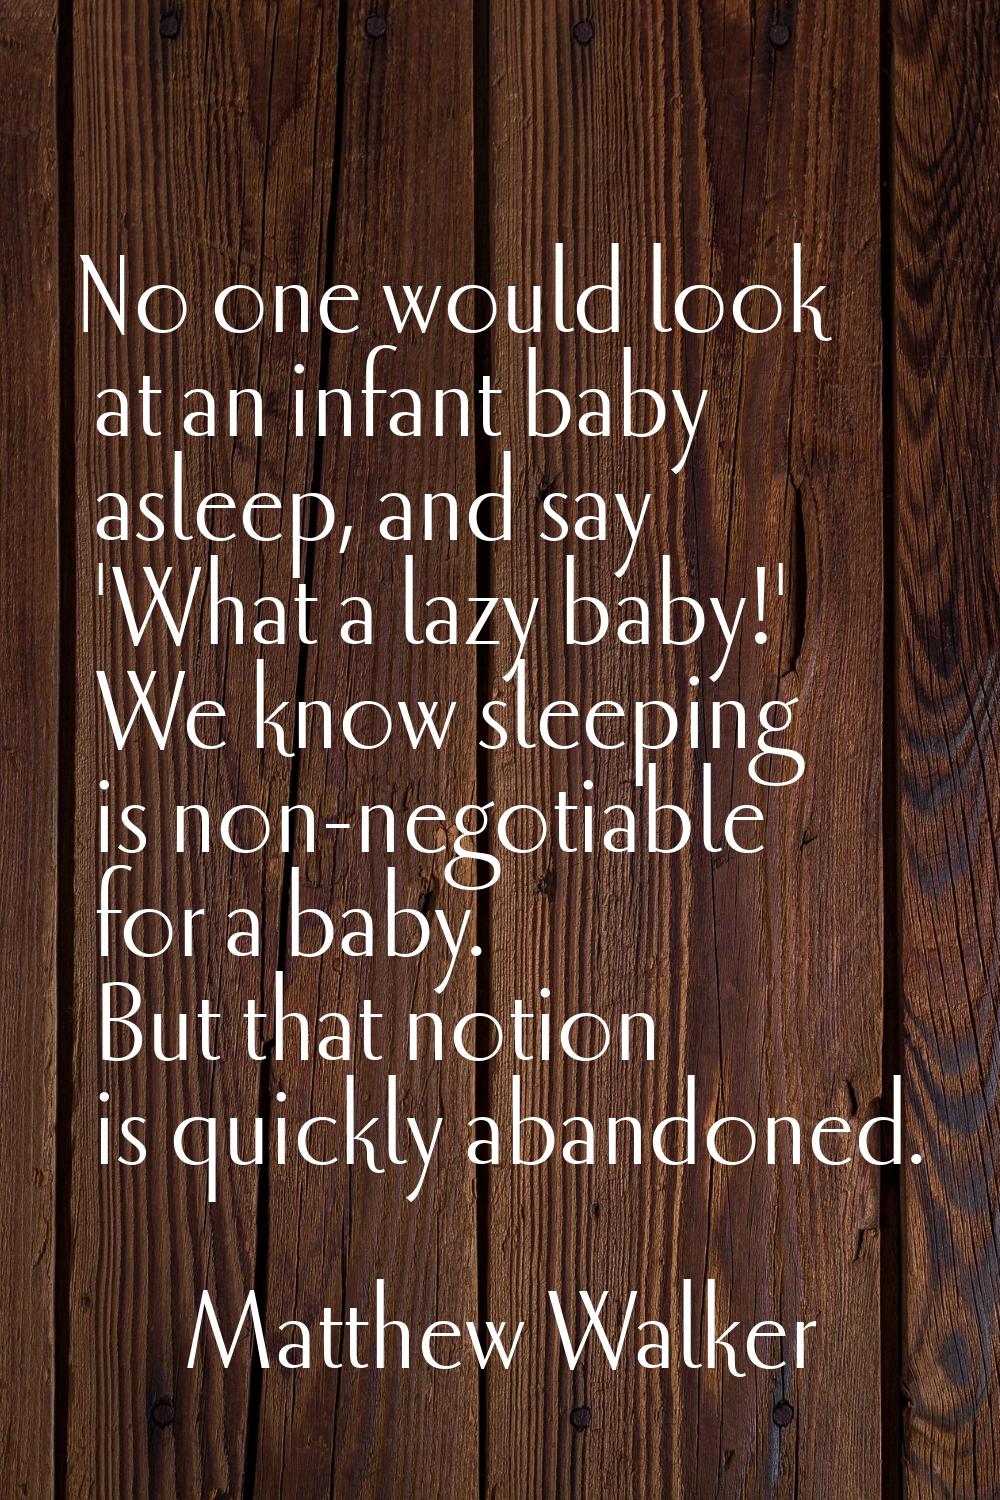 No one would look at an infant baby asleep, and say 'What a lazy baby!' We know sleeping is non-neg